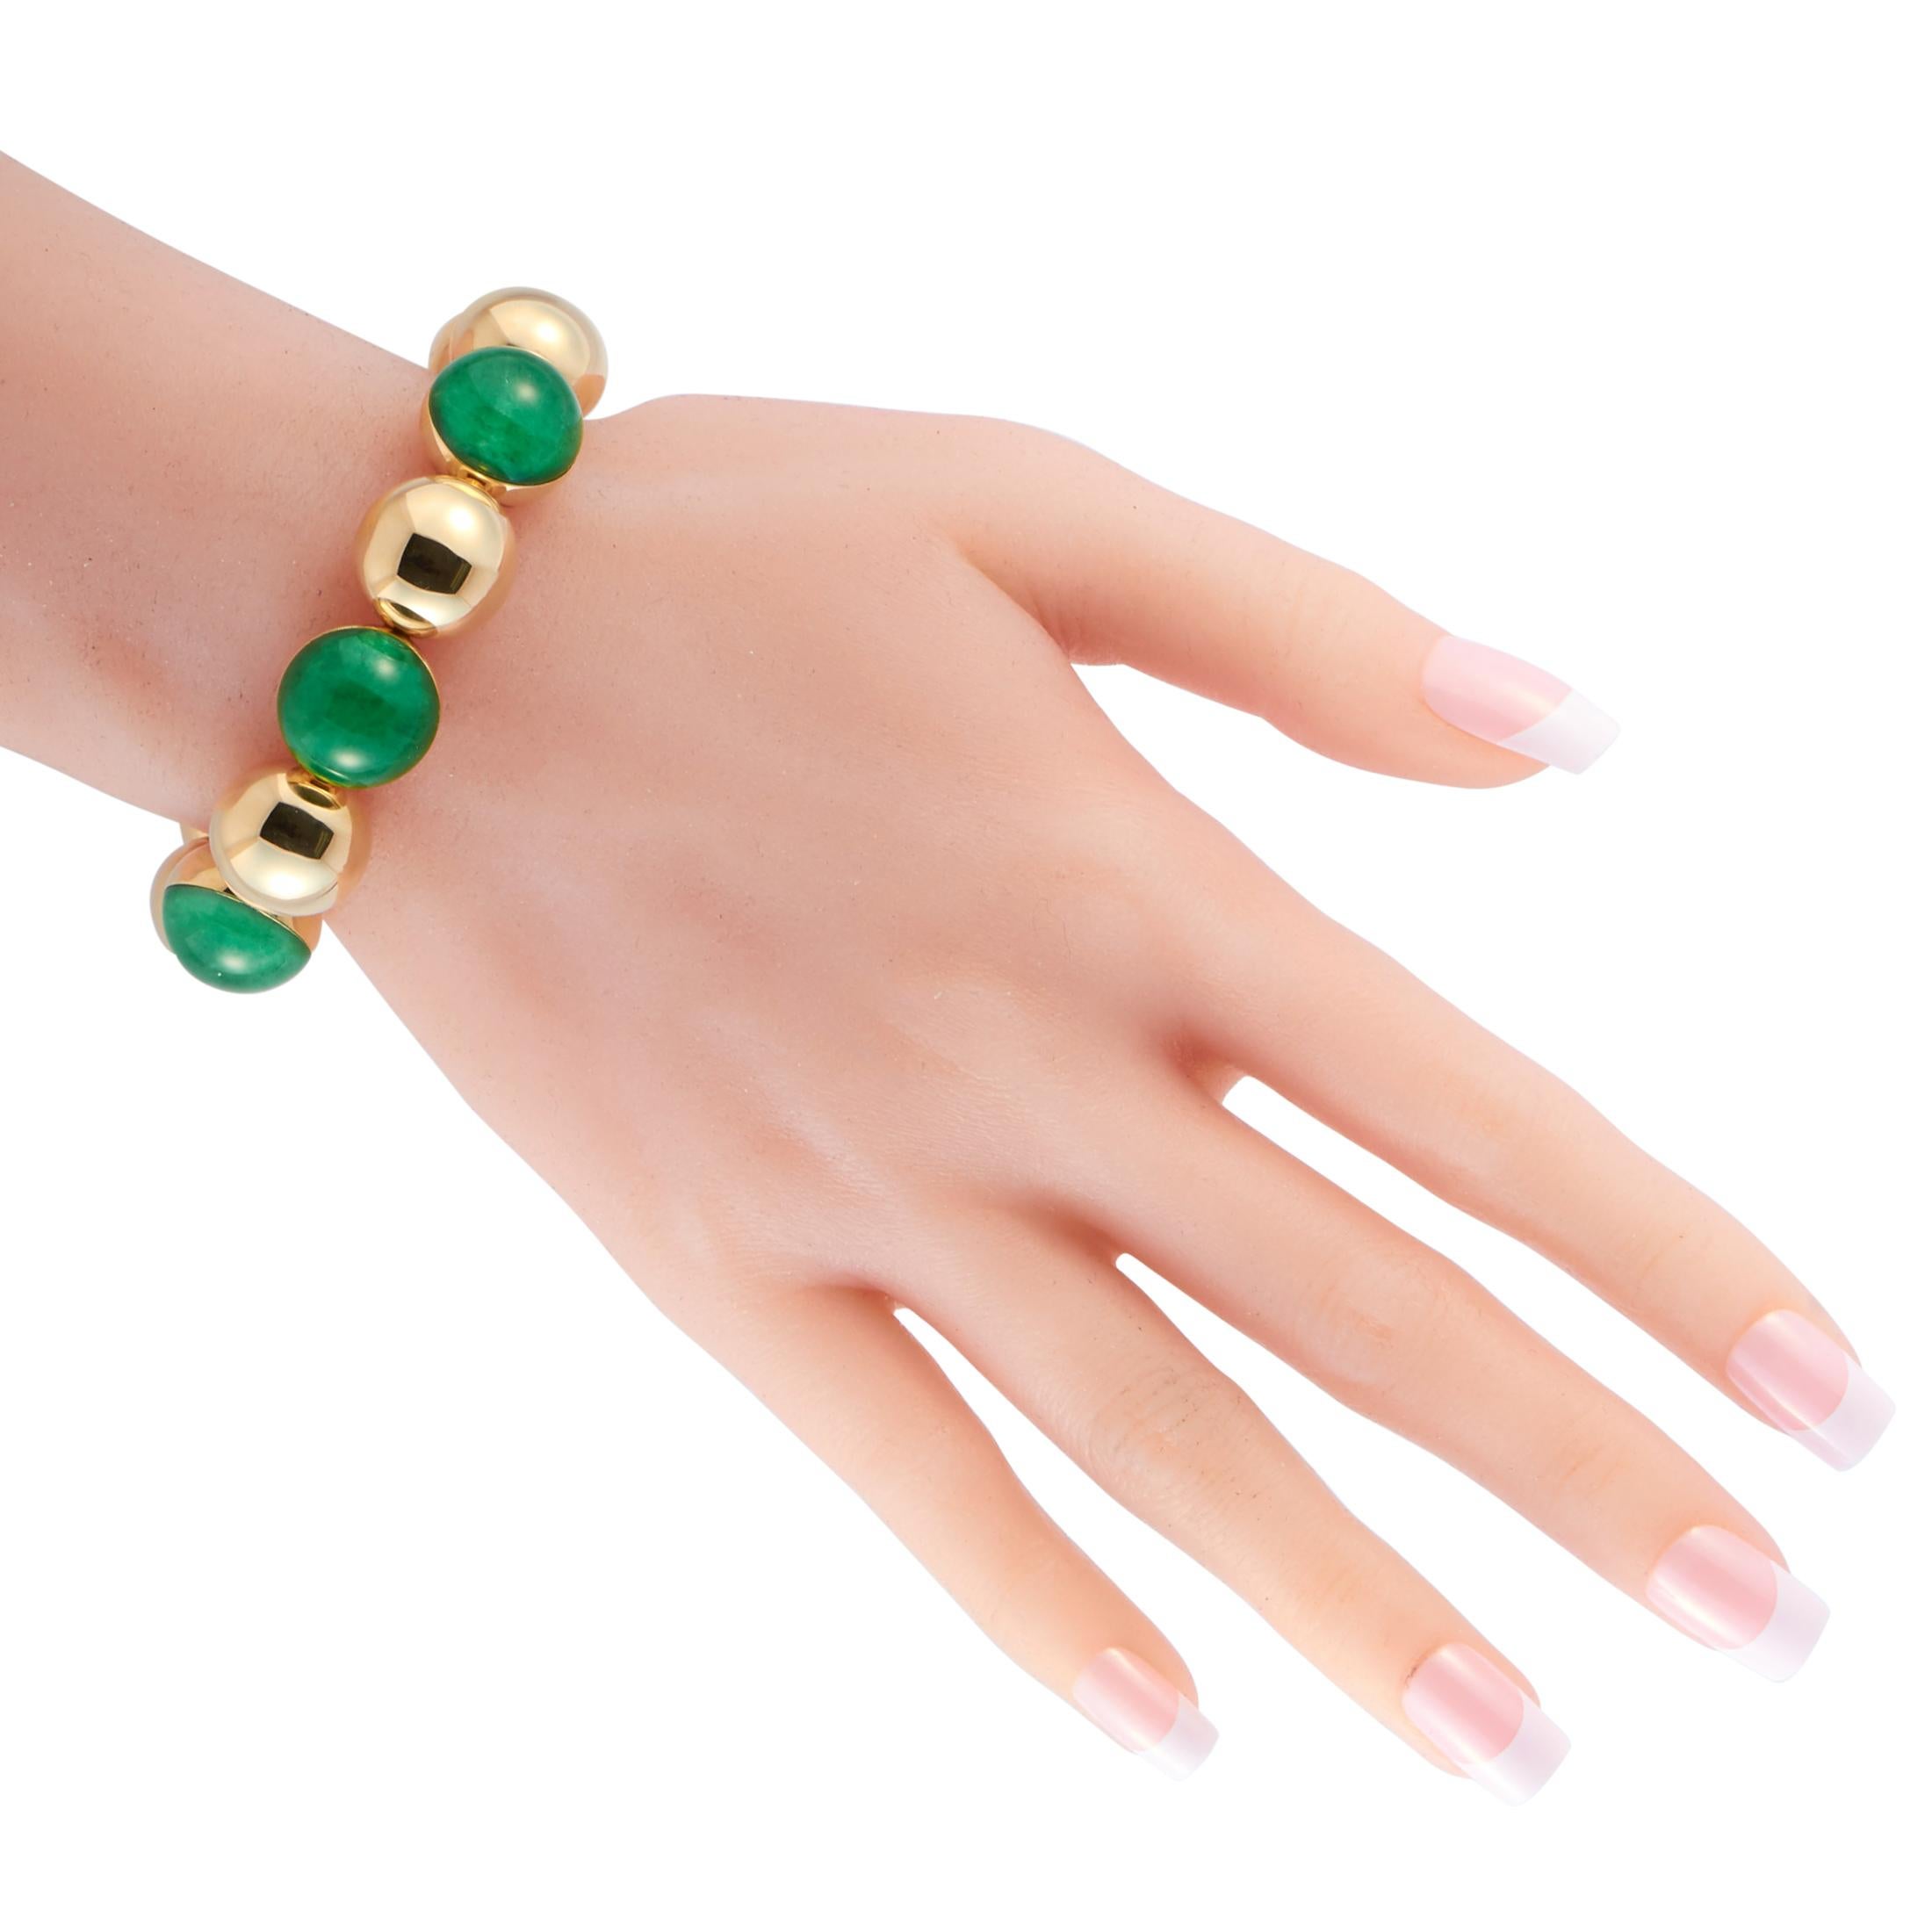 The Vhernier “Re Sole” bracelet is made of 18K rose gold and embellished with jade and rock crystal. The bracelet weighs 72.8 grams and measures 7” in length.

This jewelry piece is offered in brand new condition and includes the manufacturer’s box.